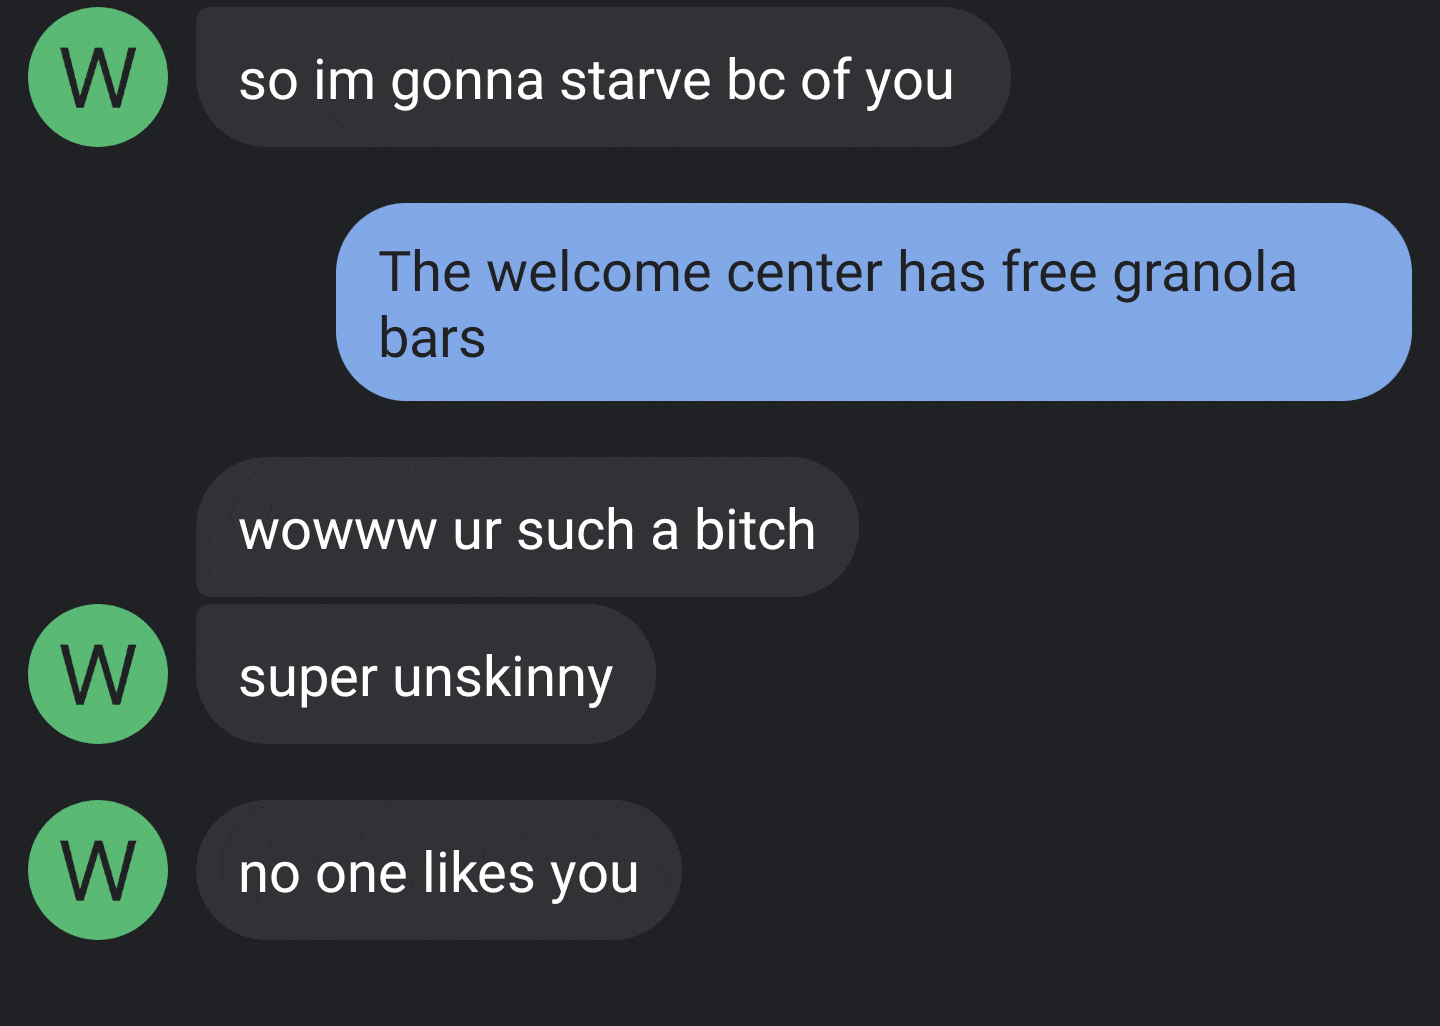 multimedia - W so im gonna starve bc of you The welcome center has free granola bars wowww ur such a bitch super unskinny W no one you